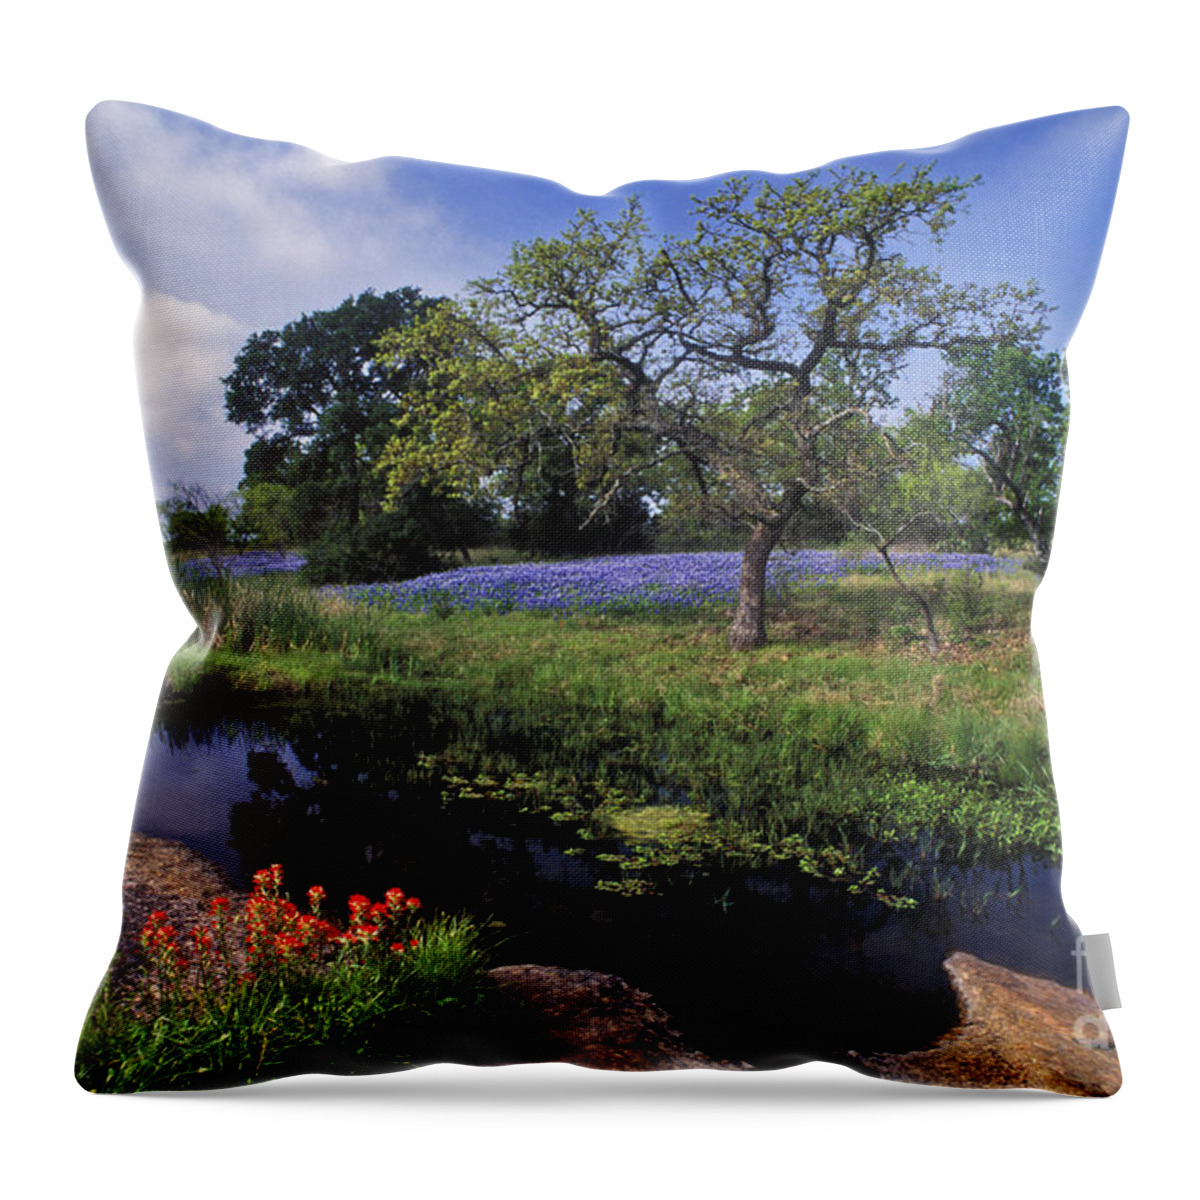 Texas Throw Pillow featuring the photograph Texas Hill Country - FS000056 by Daniel Dempster